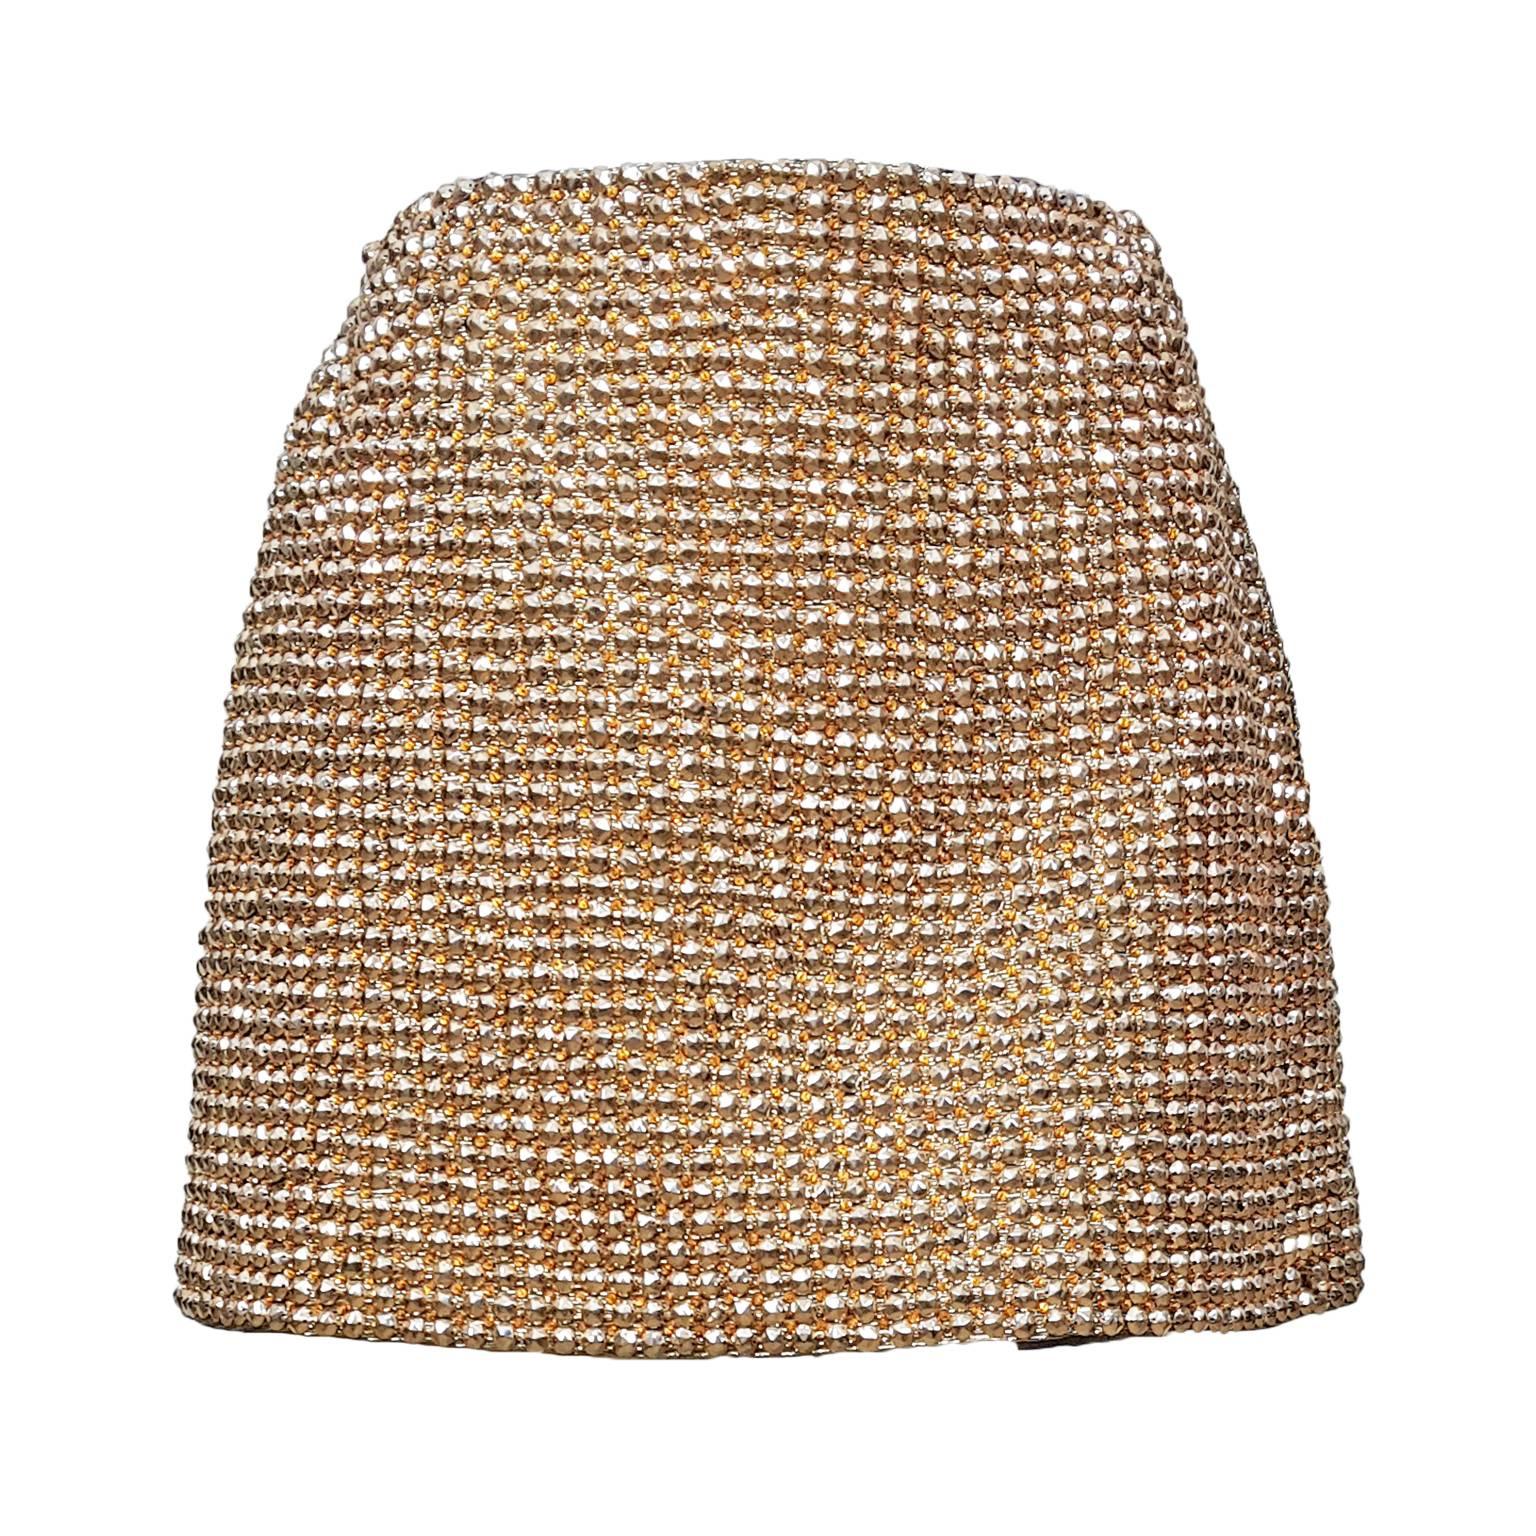 Gianni Versace Couture Golden Jewel Skirt AW 1994 For Sale